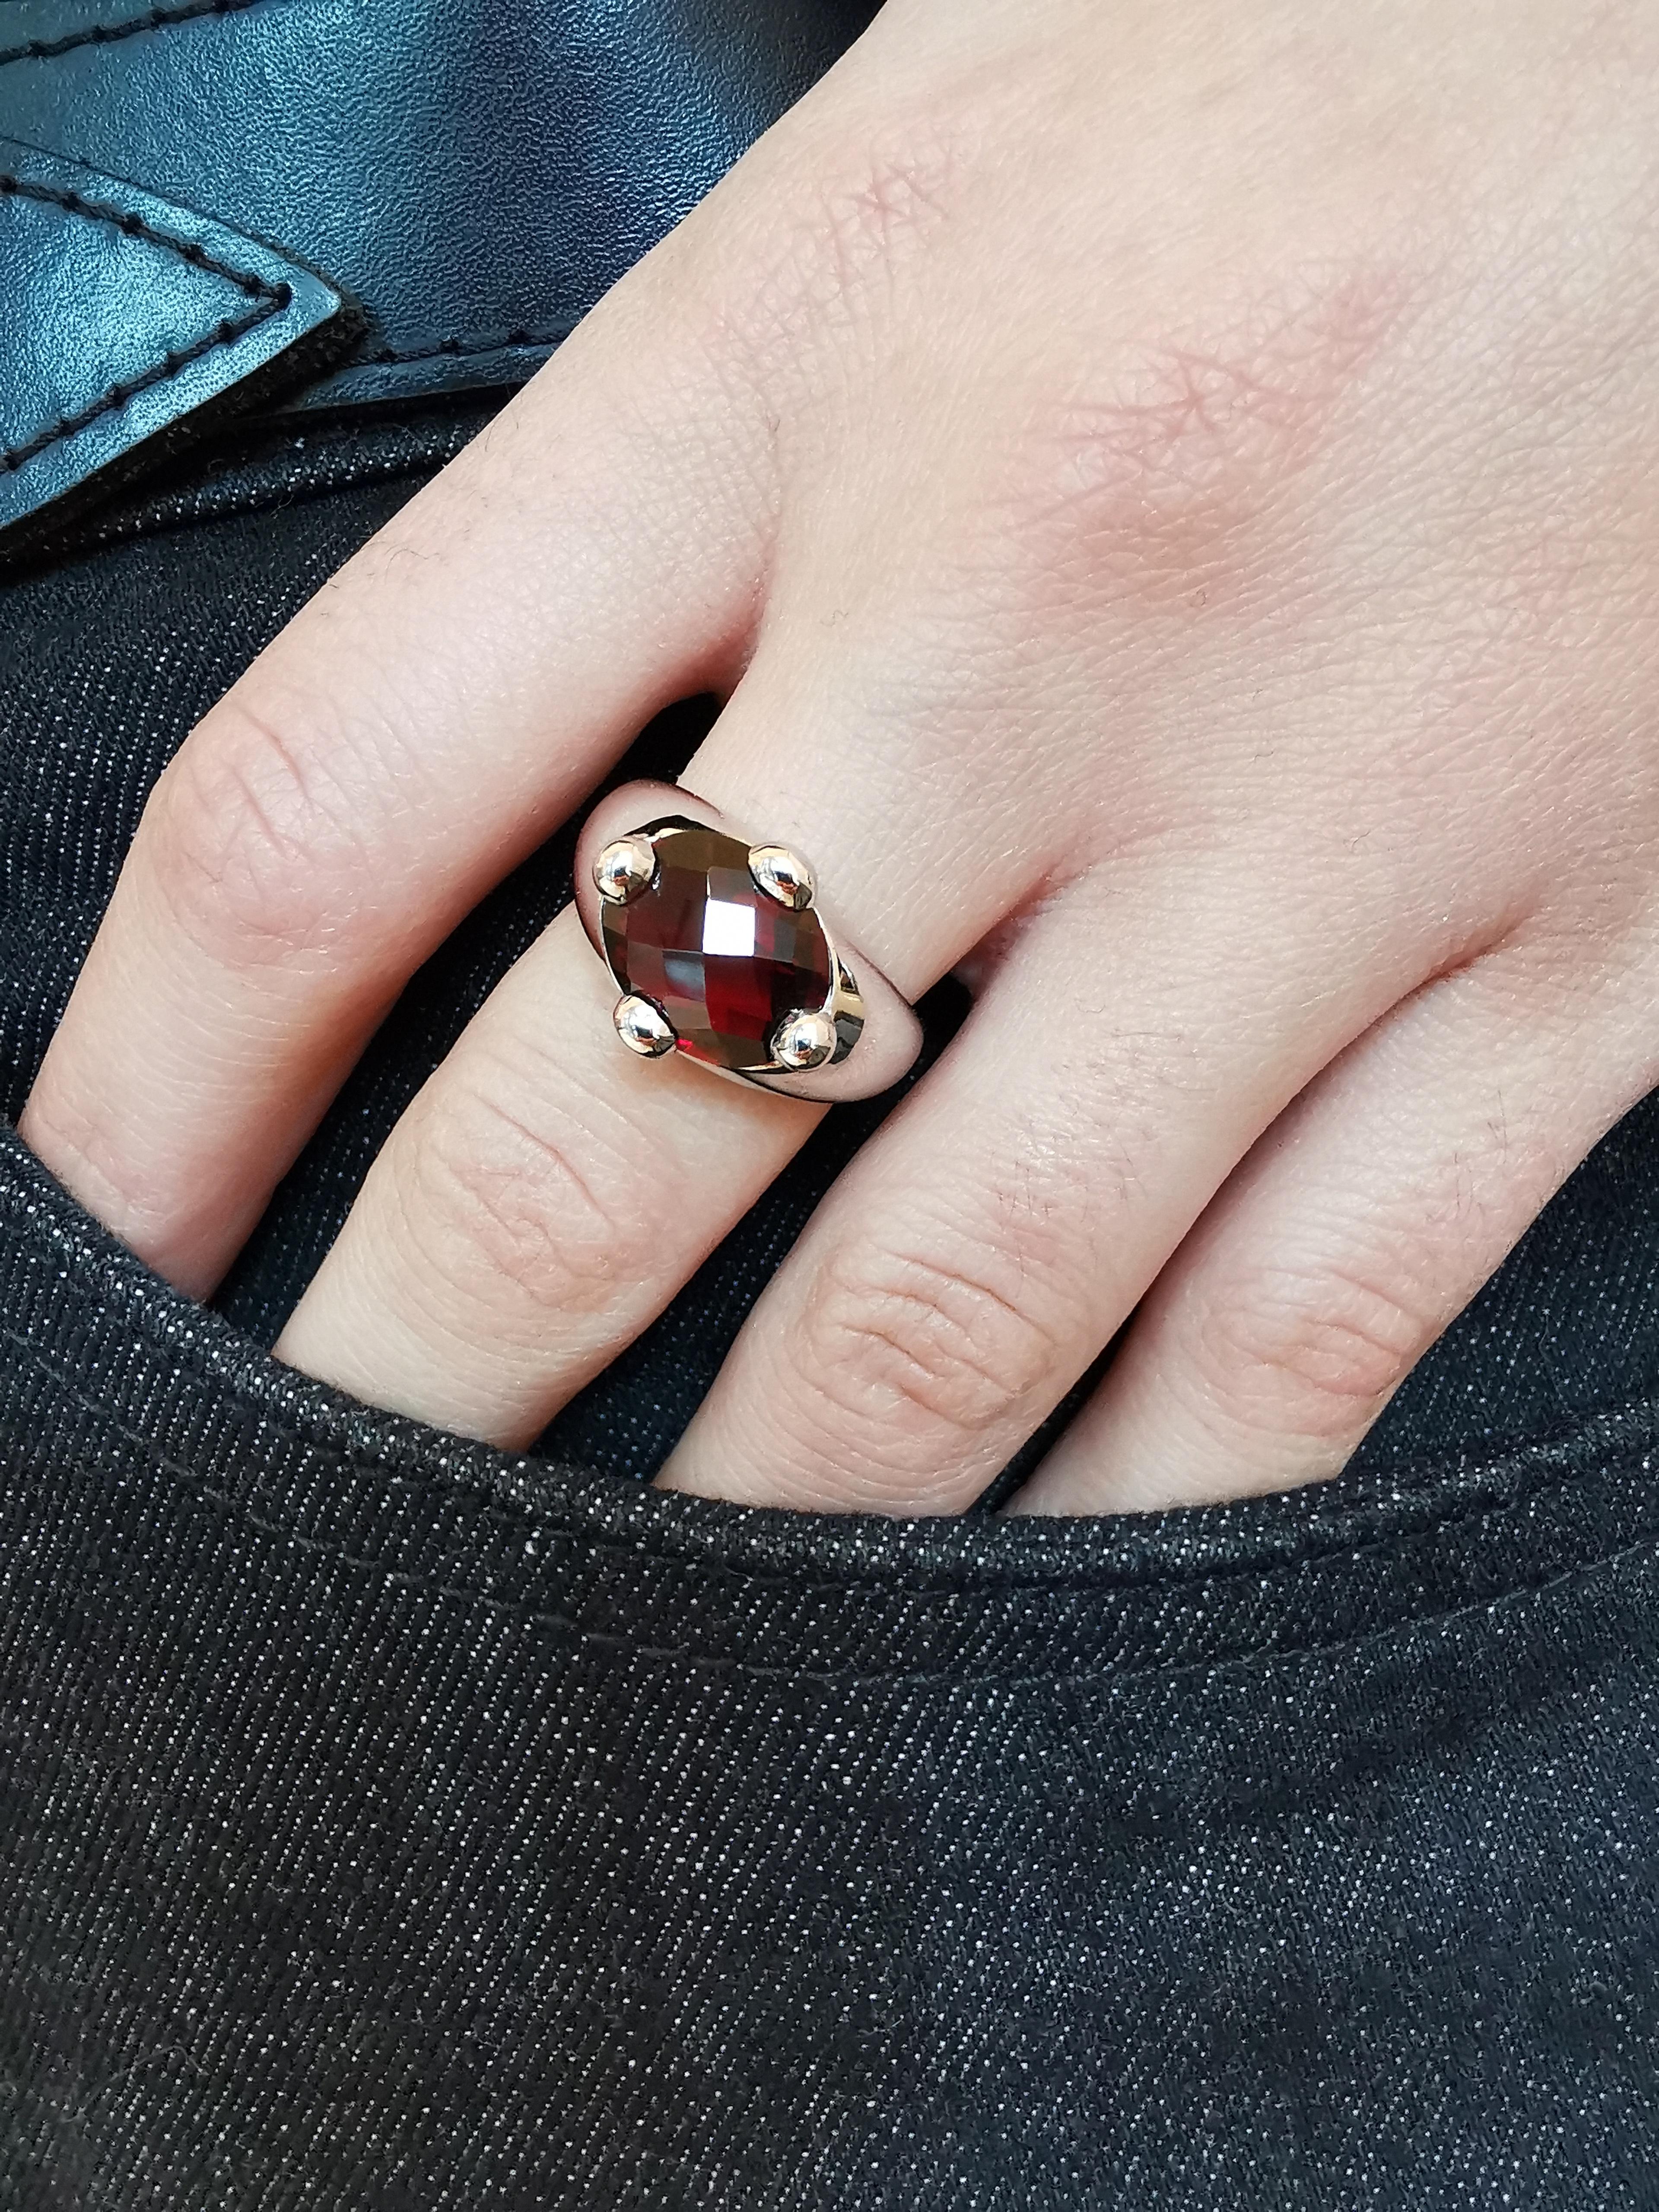 18 Kt White Gold and Faceted Oval Garnet Ring For Sale 1